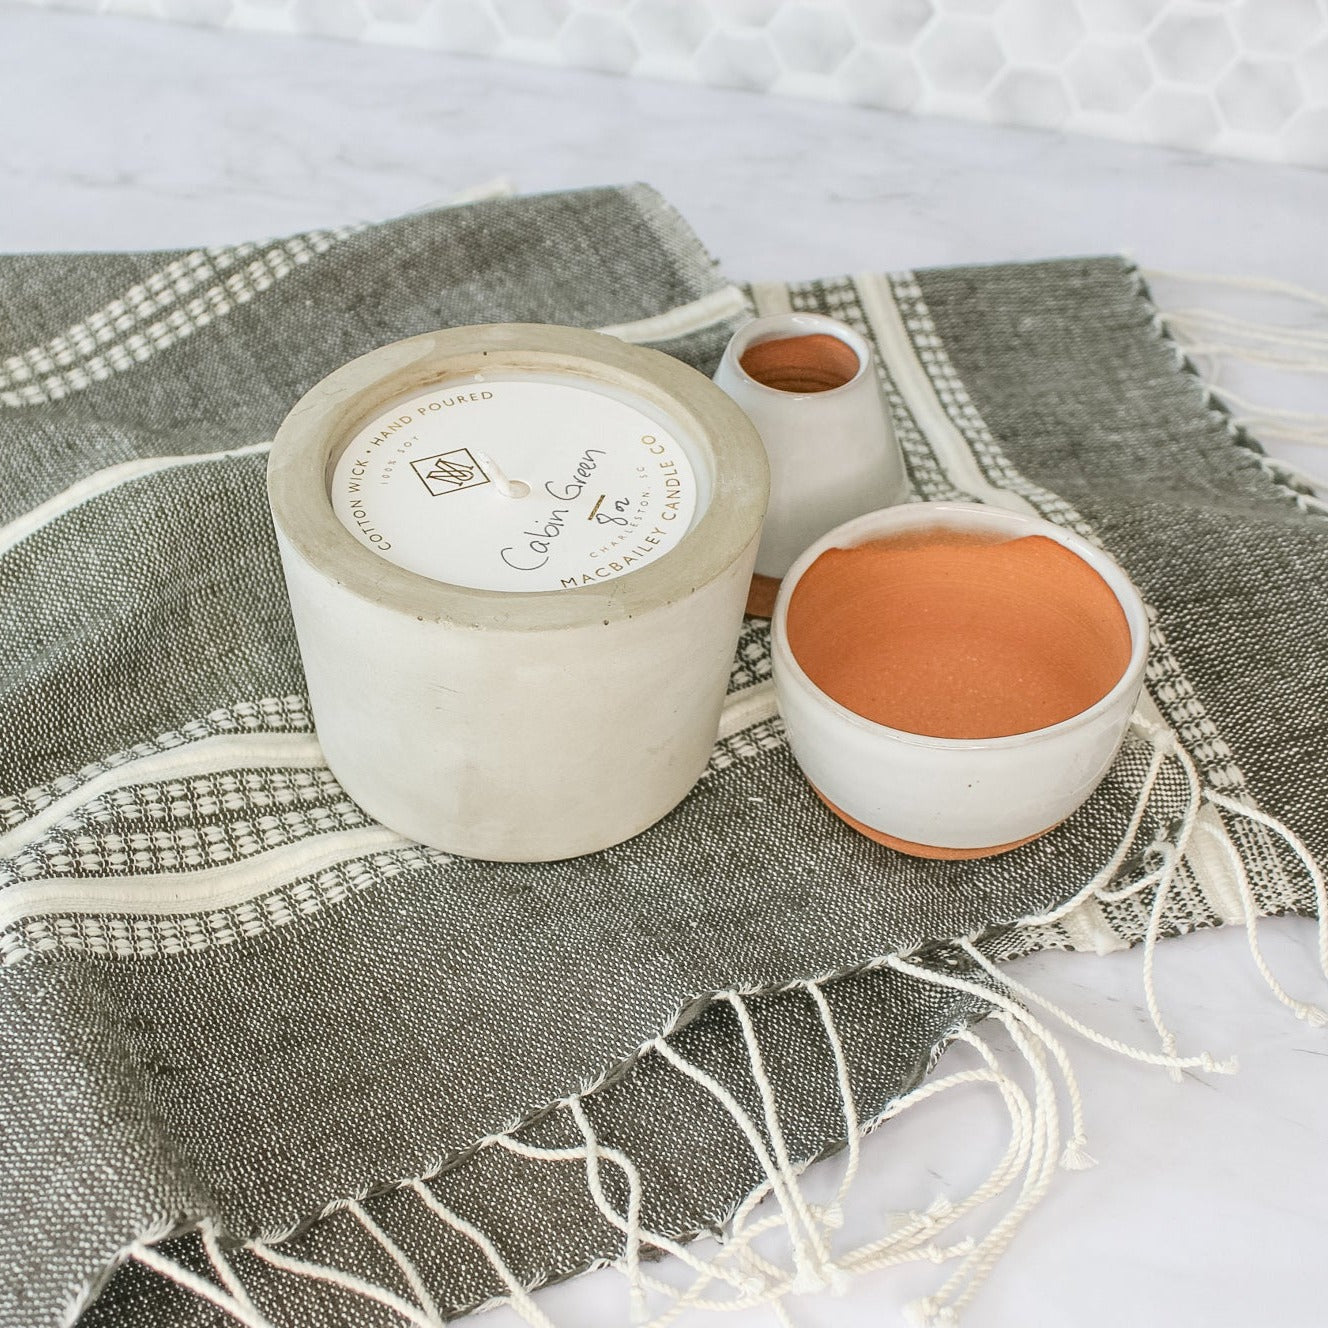 On a marble countertop, sits our Aden cotton hand towel. A dark grey towel with natural colored stripes and fringe on the ends. On top of the towel is our concrete candle in Cabin Green scent and two of our small planters.